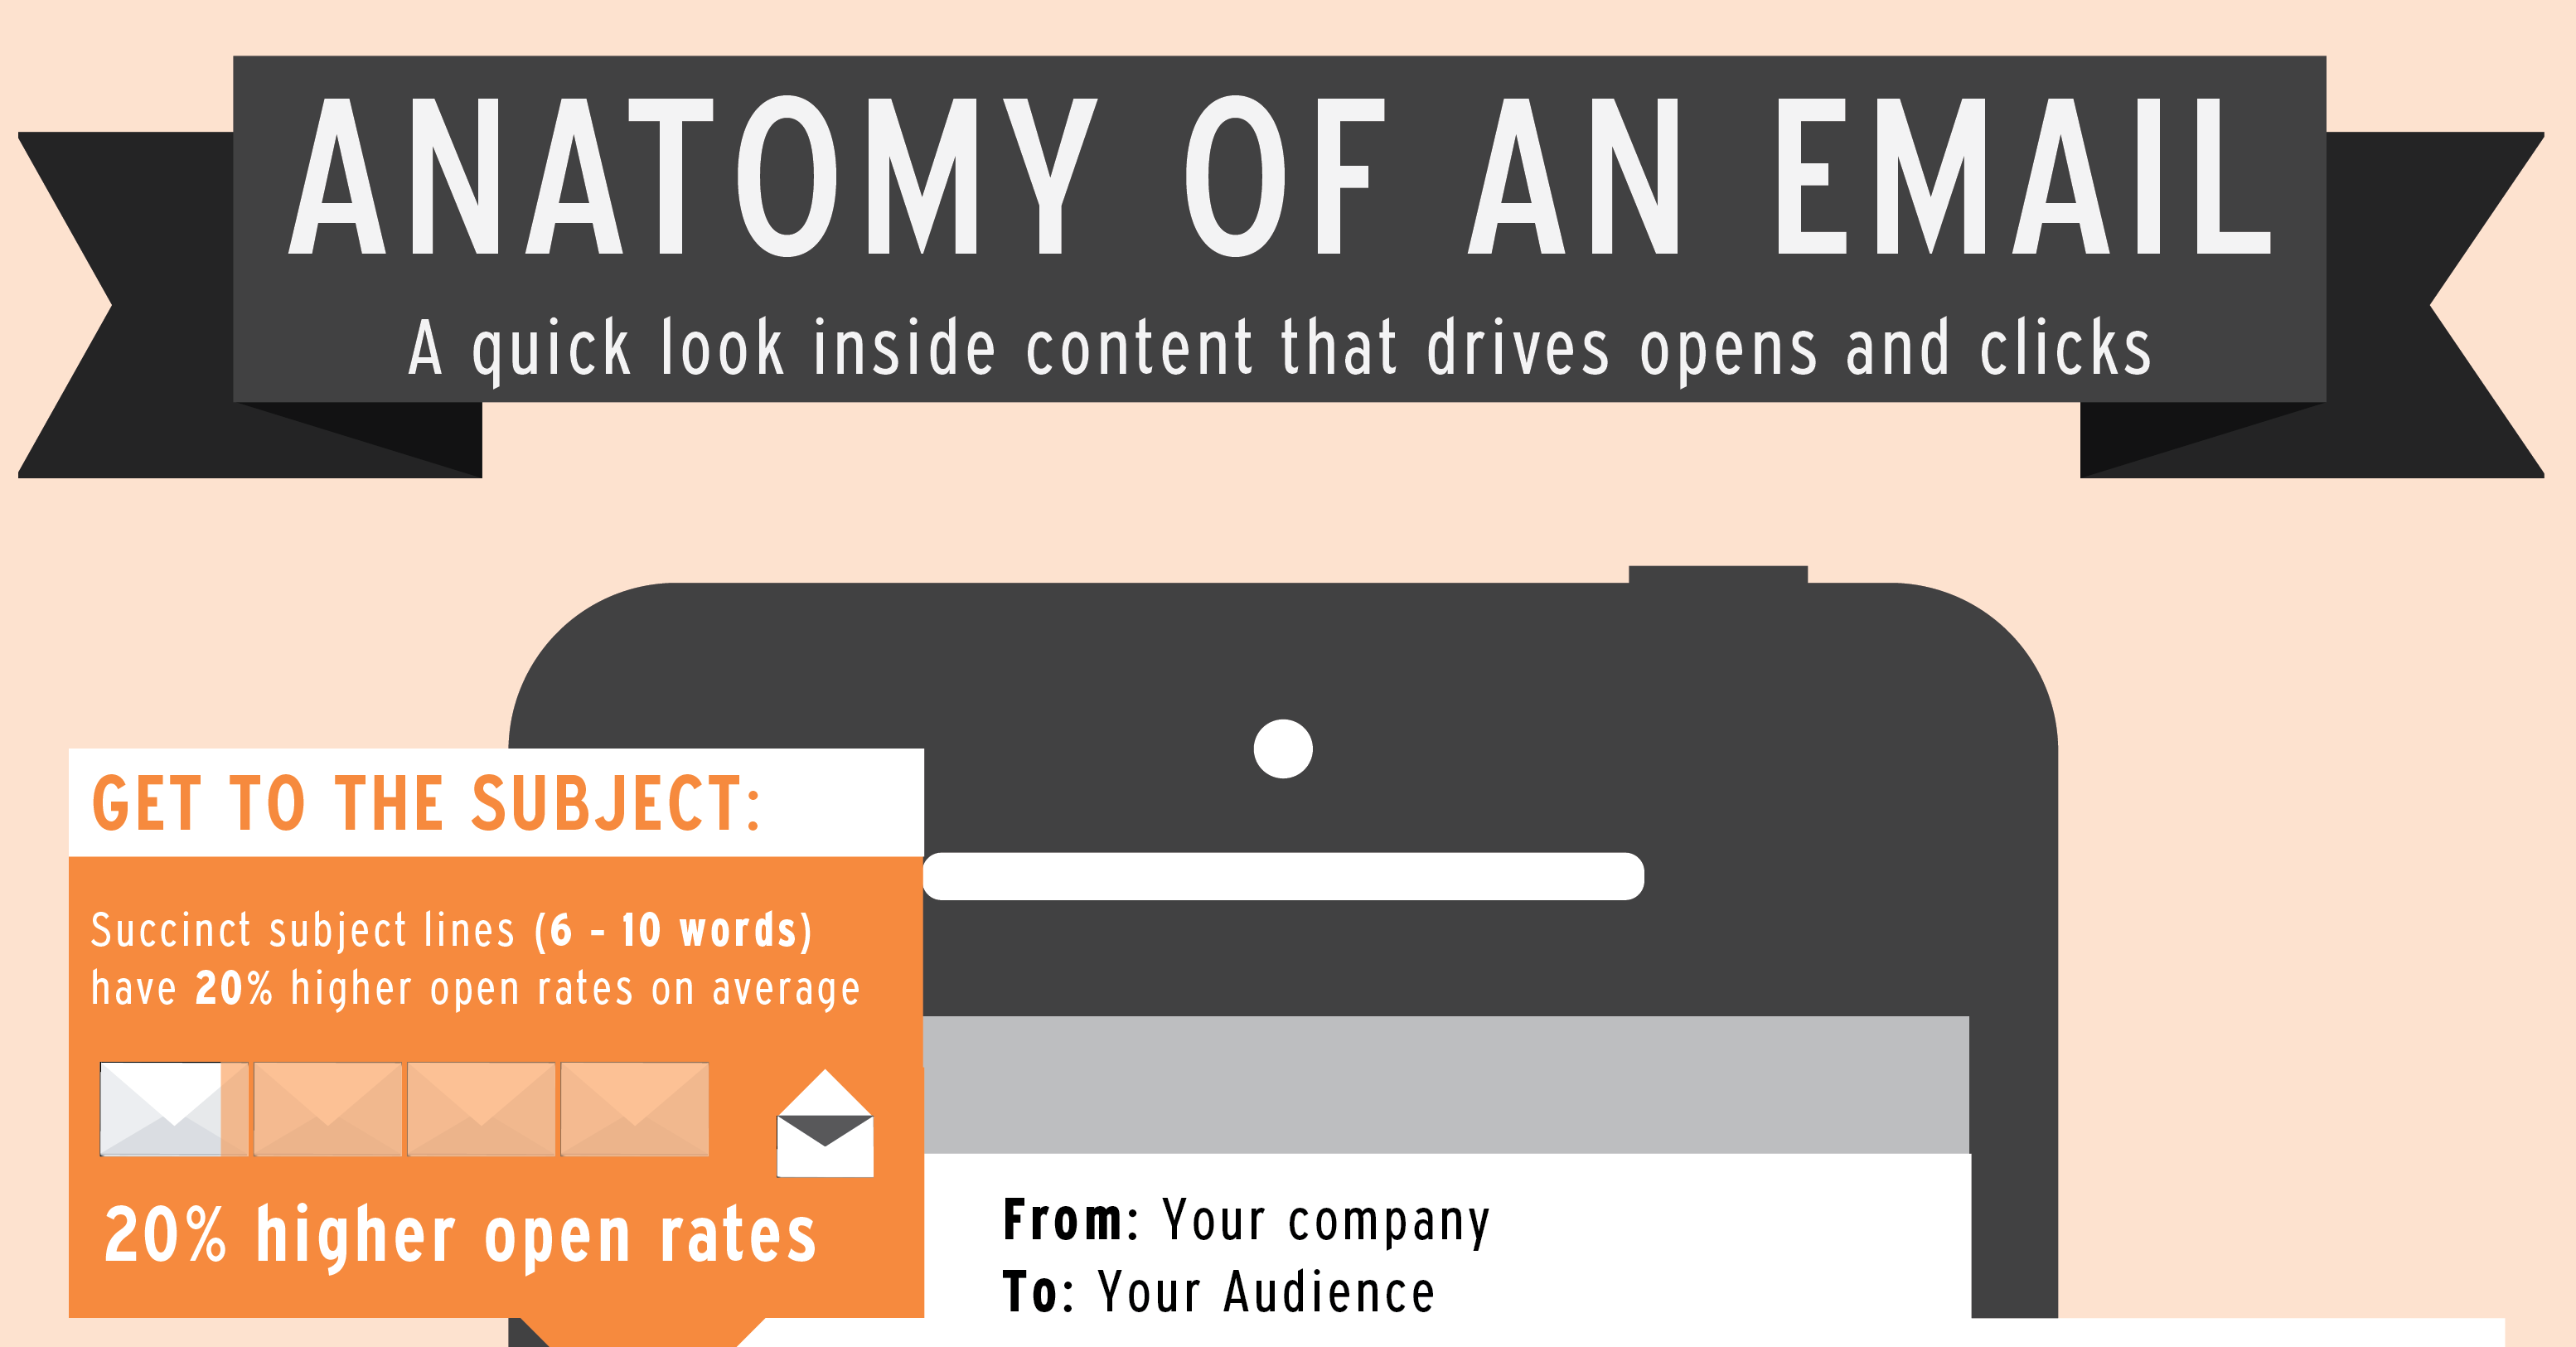 Four Elements That Will Make or Break Your Email Marketing